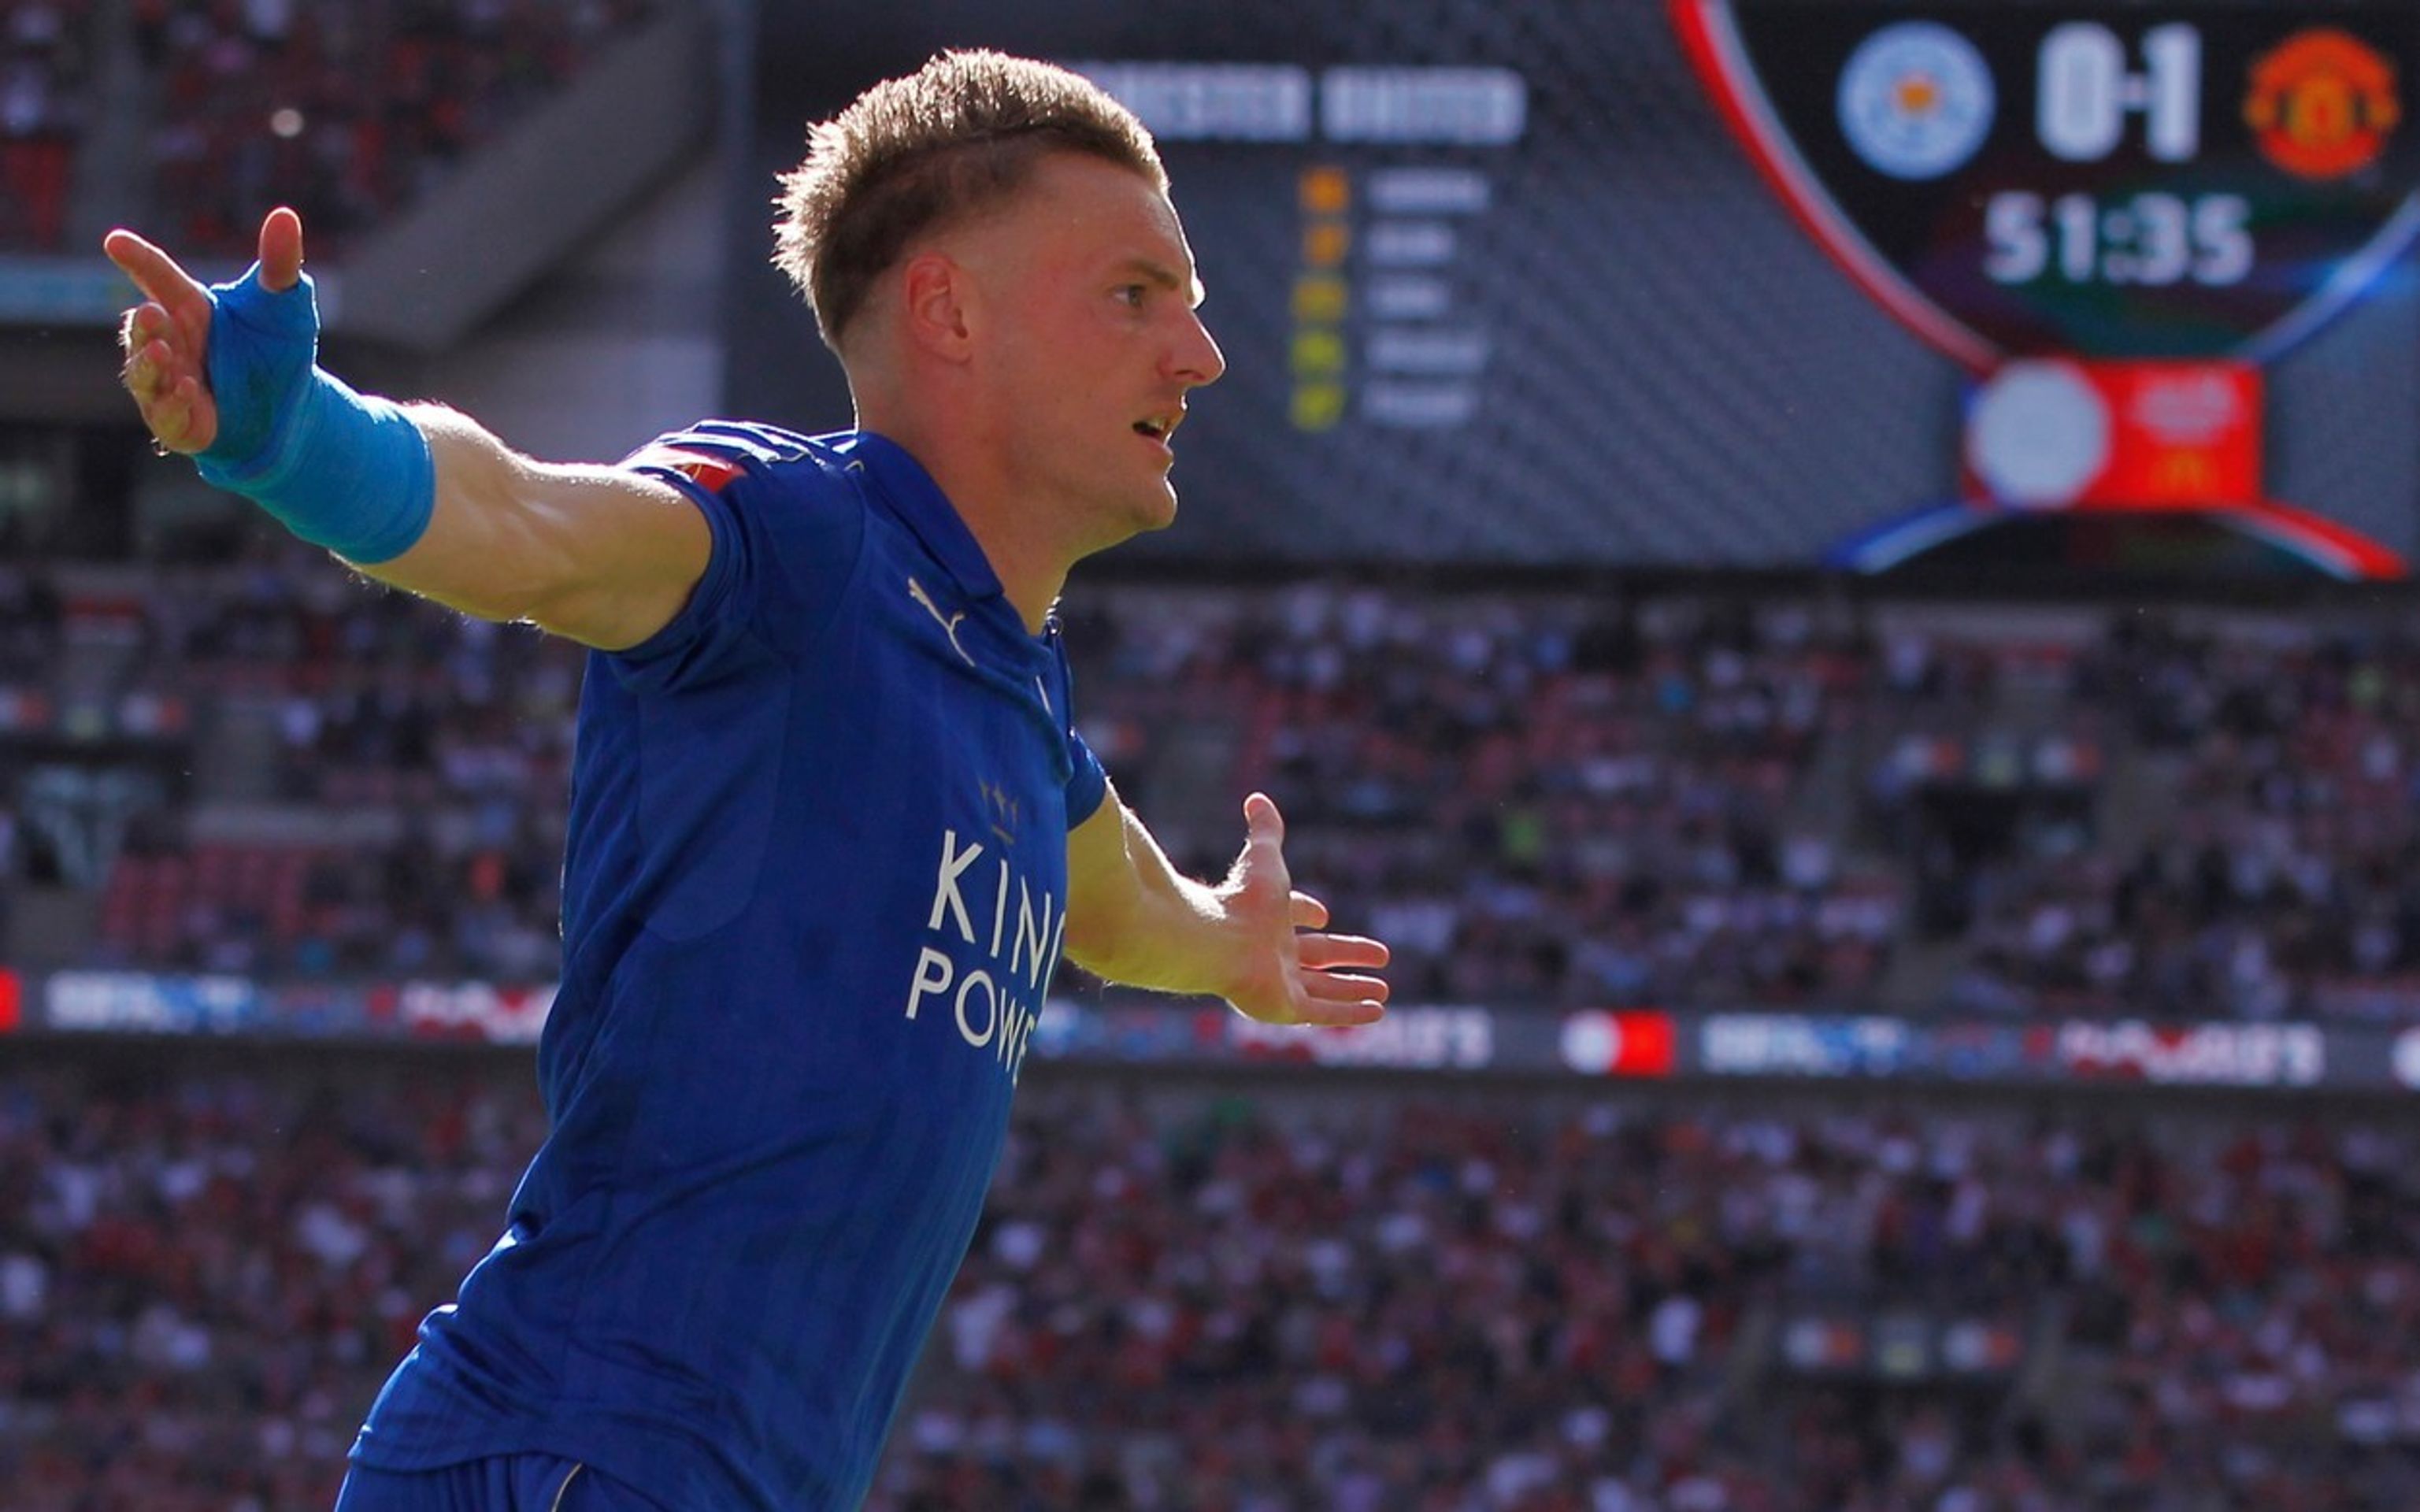 Community Shield: Leicester - Manchester United 1:2 - 2 - GALERIE: Community Shield: Leicester - Manchester United 1:2 (3/5)